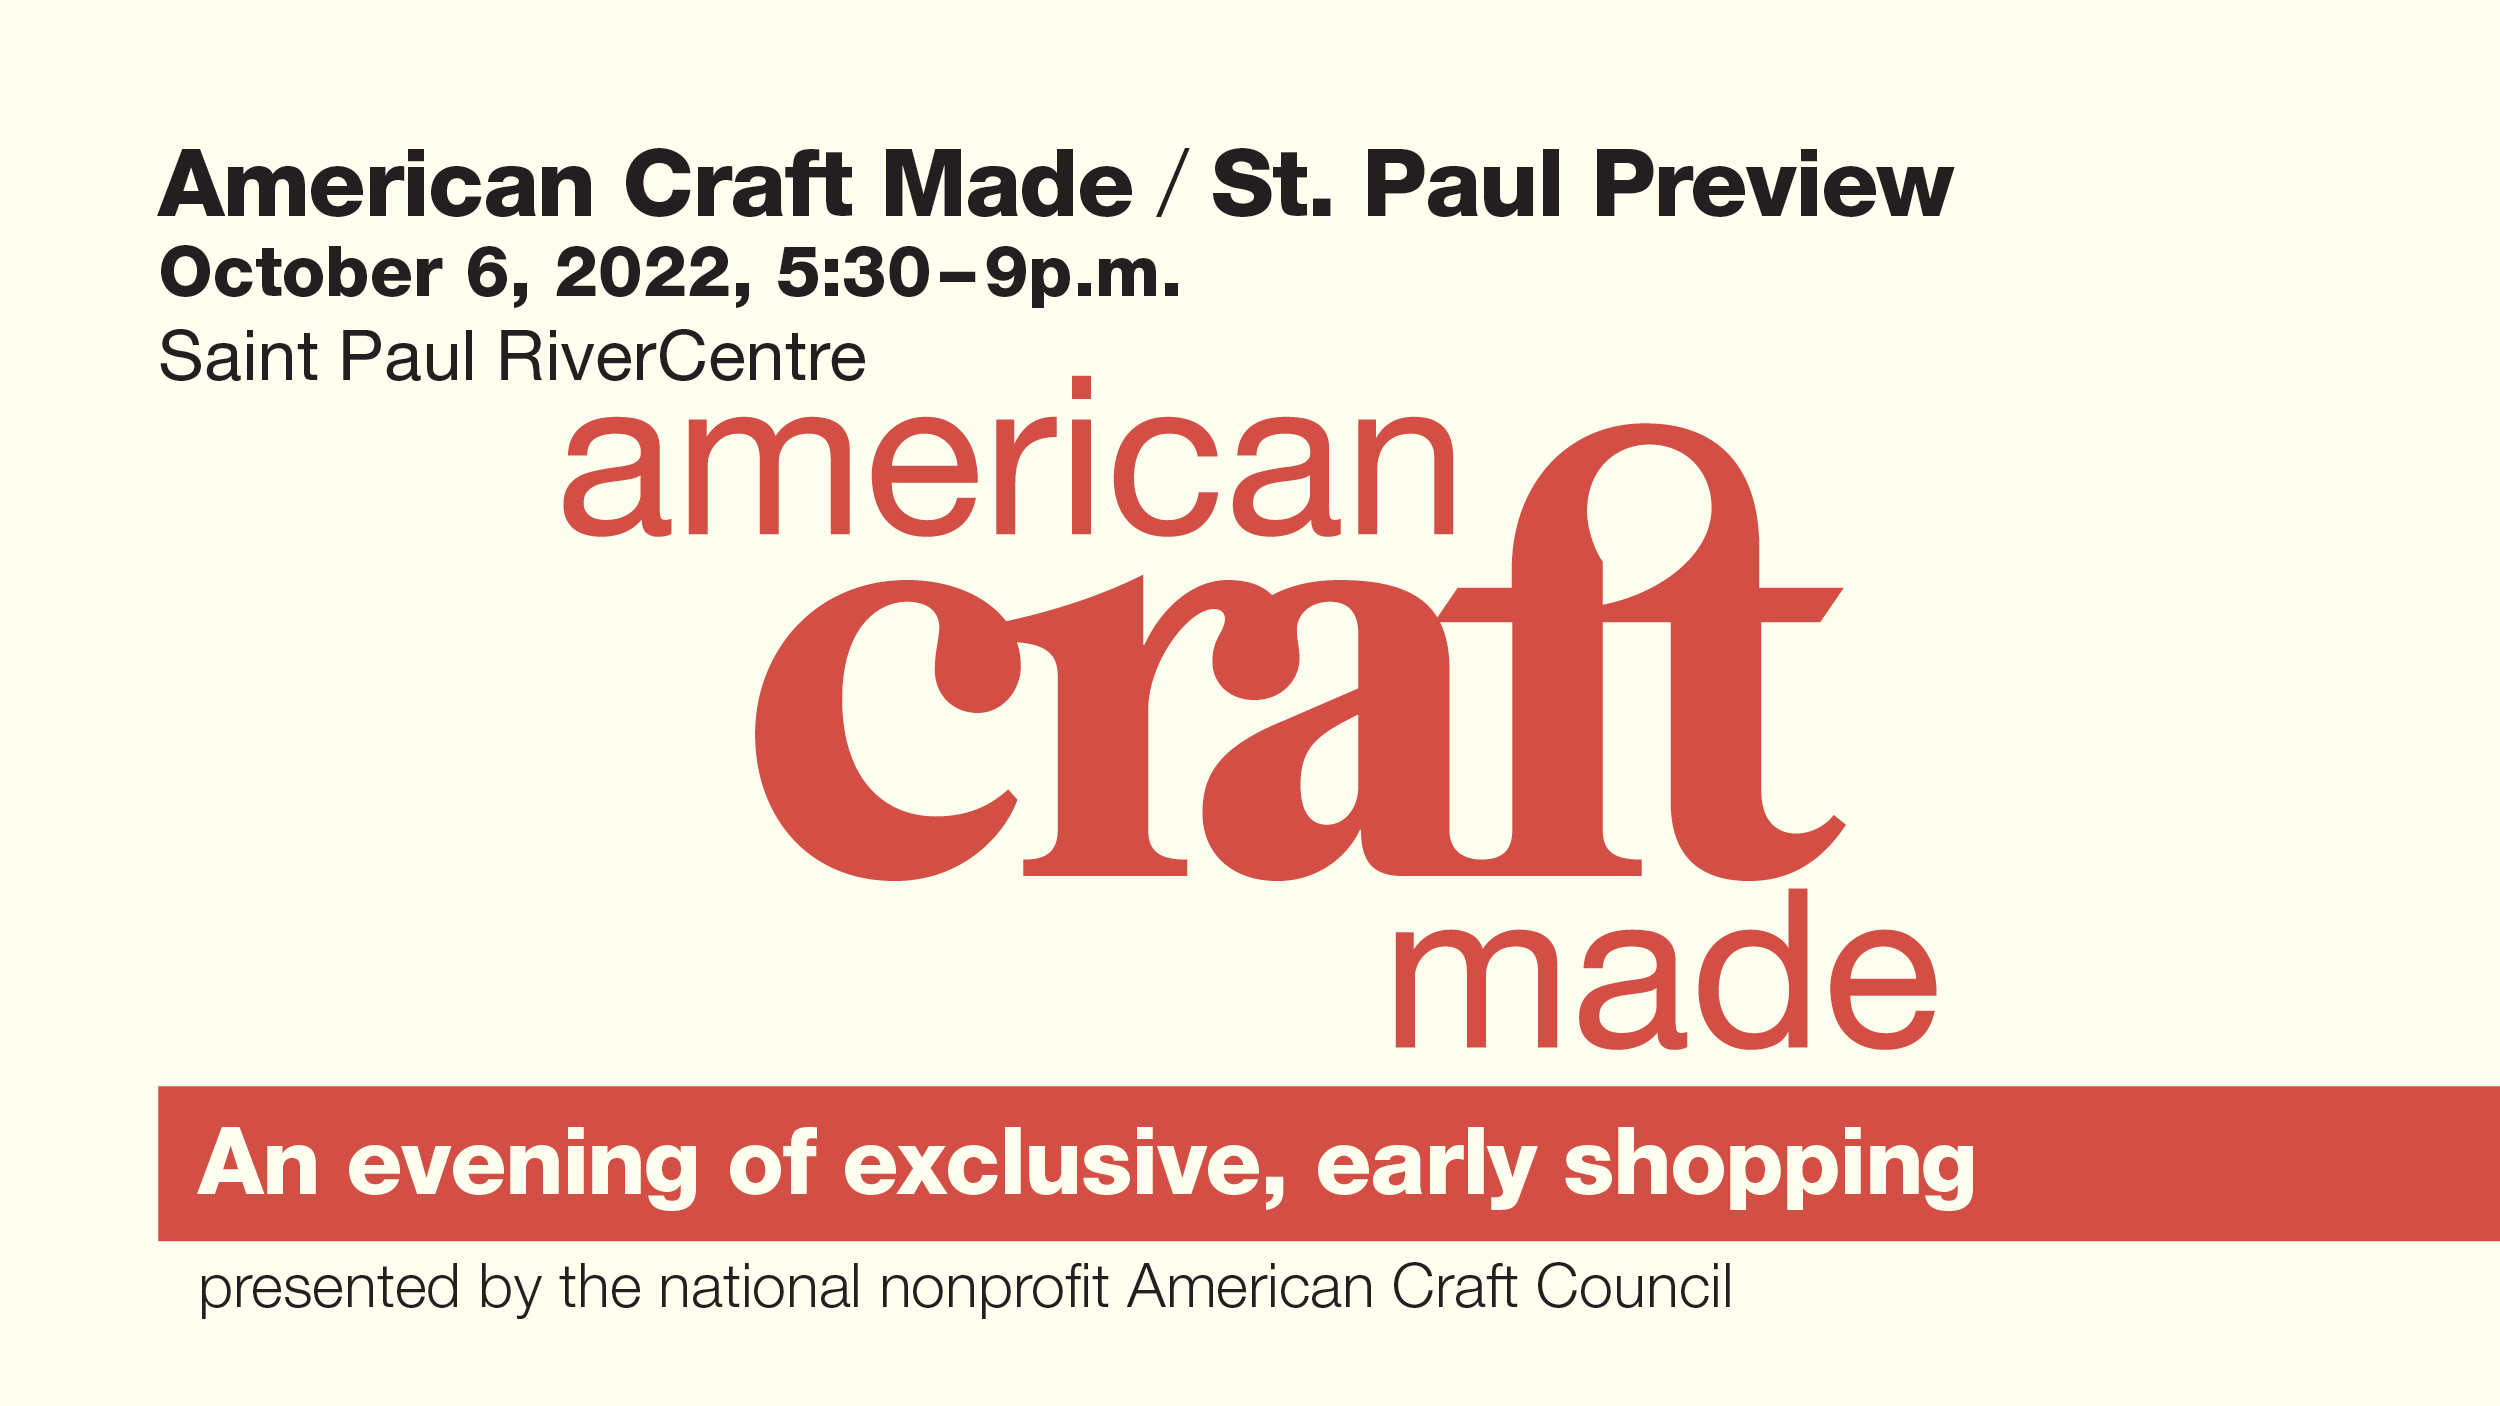 american craft made st paul preview an evening of exclusive early shopping presented by the national nonprofit american craft council october 6 2022 530 to 9 saint paul rivercentre